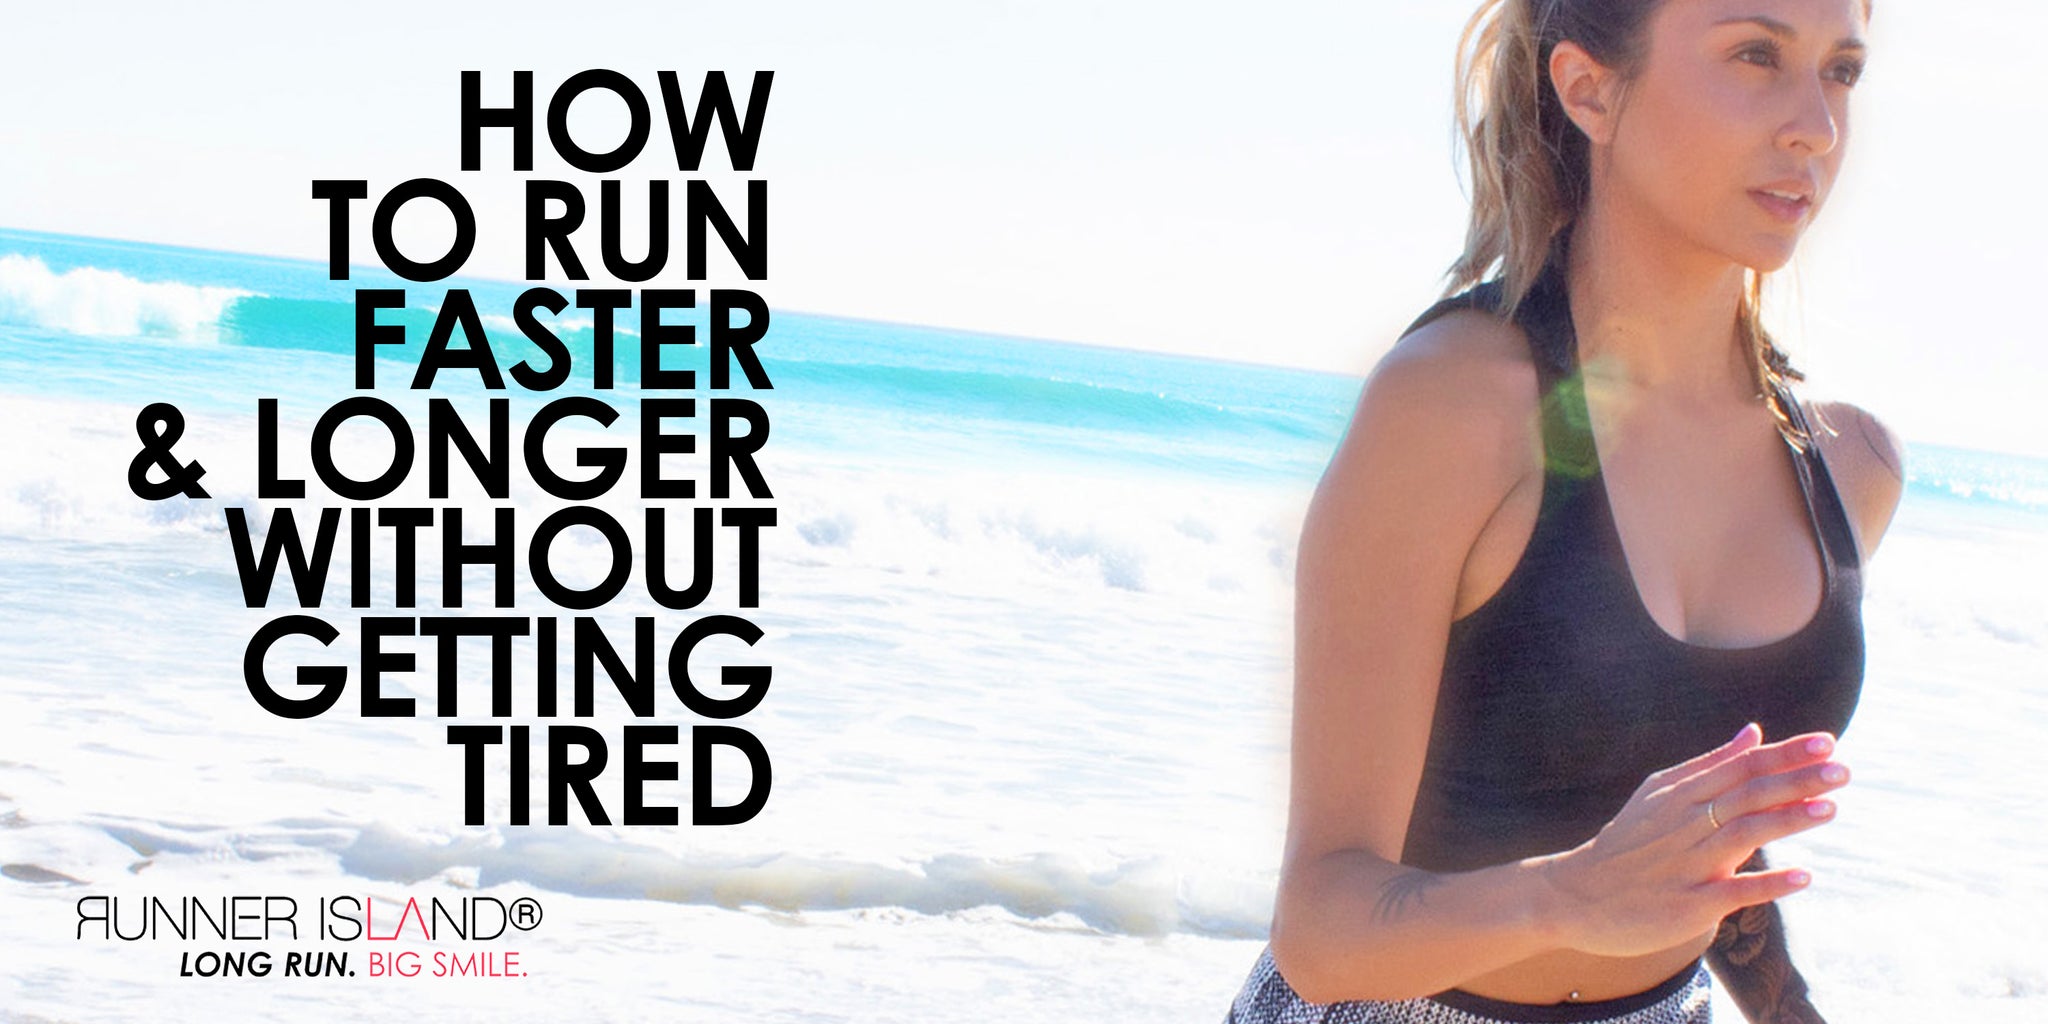 How to Run Faster and Longer Without Getting Tired